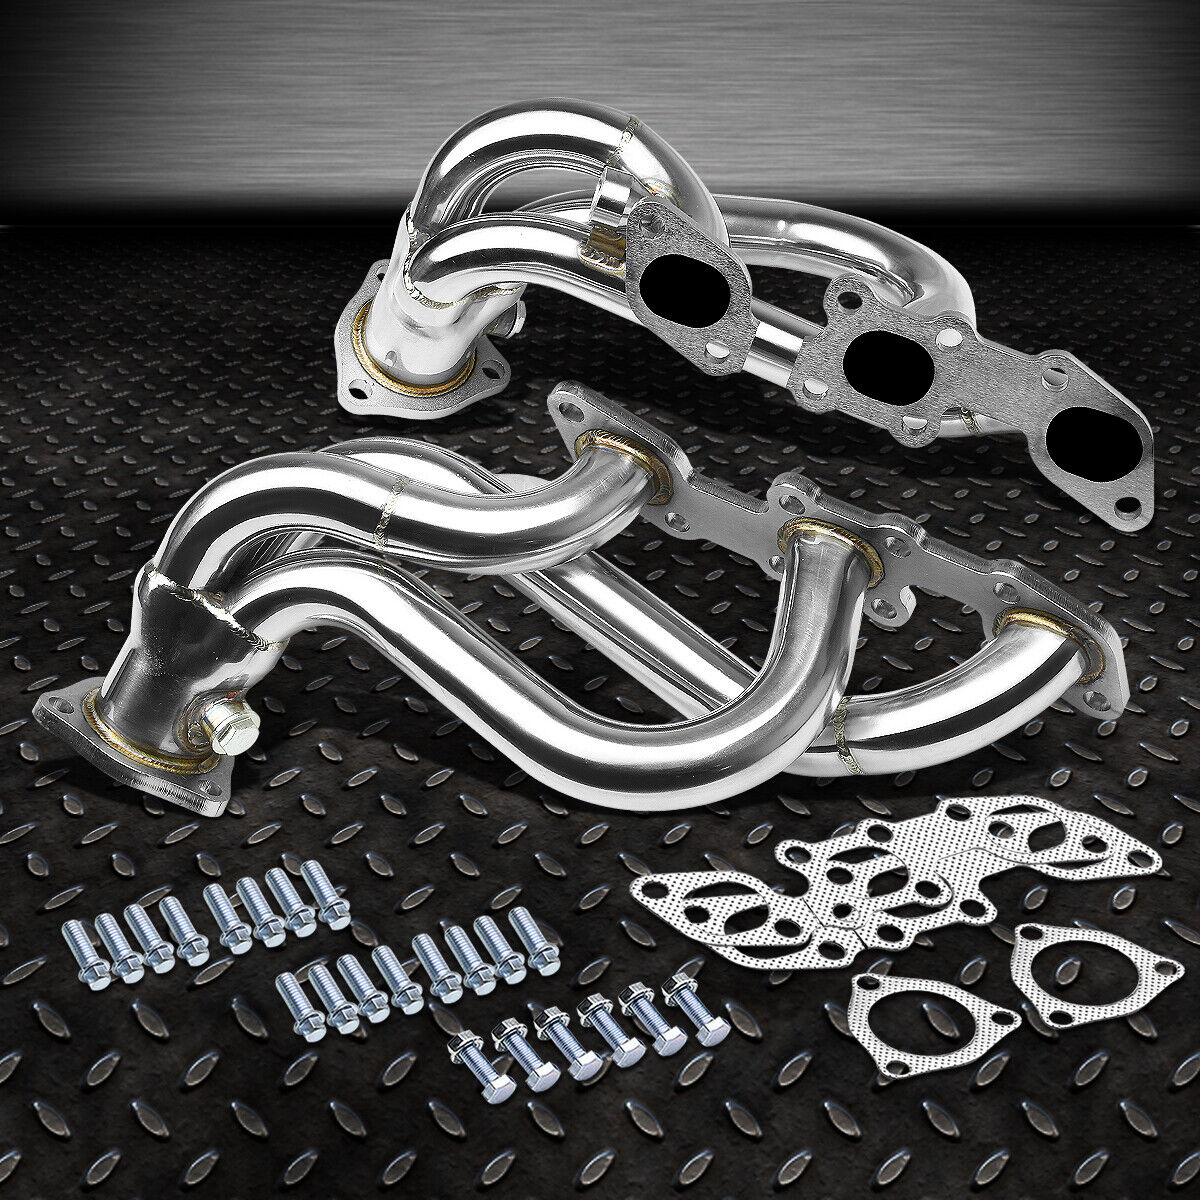 FOR 90-96 NISSAN 300ZX Z32 V6 NON-TURBO STAINLESS RACING MANIFOLD HEADER/EXHAUST